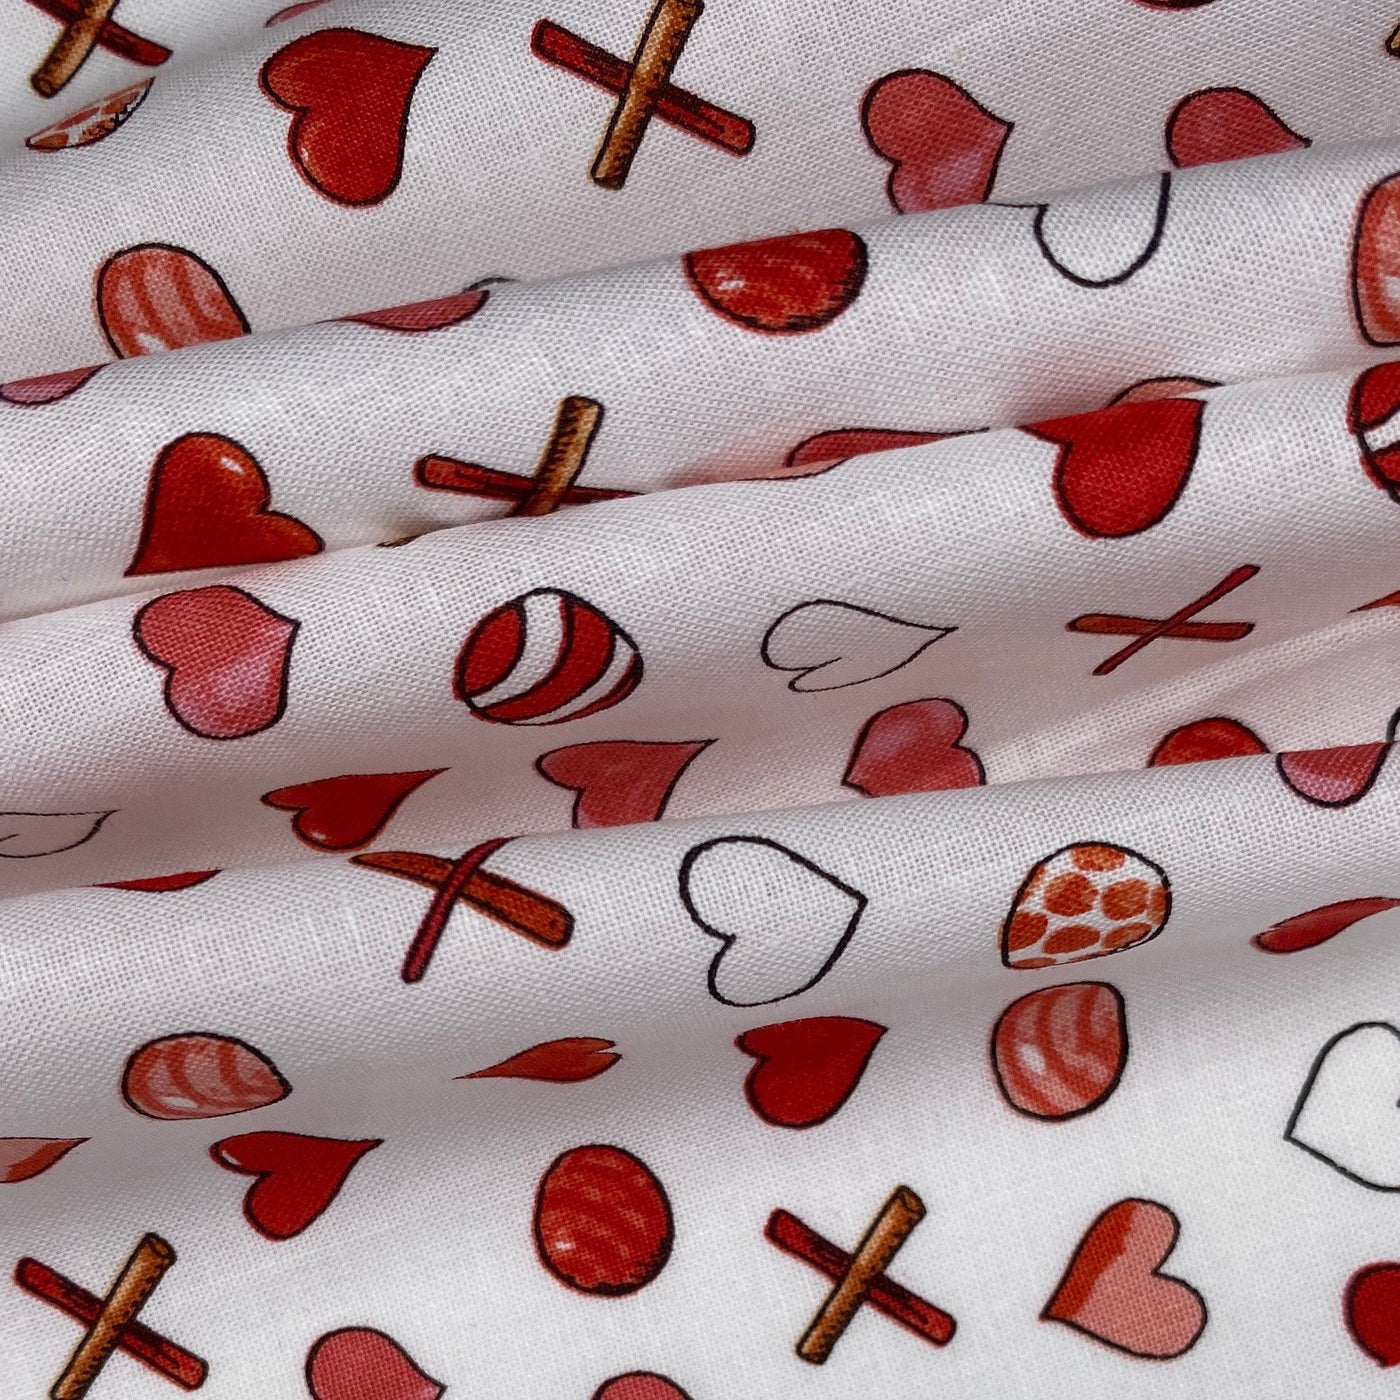 Quilting Cotton - Puppy Love - White/Red